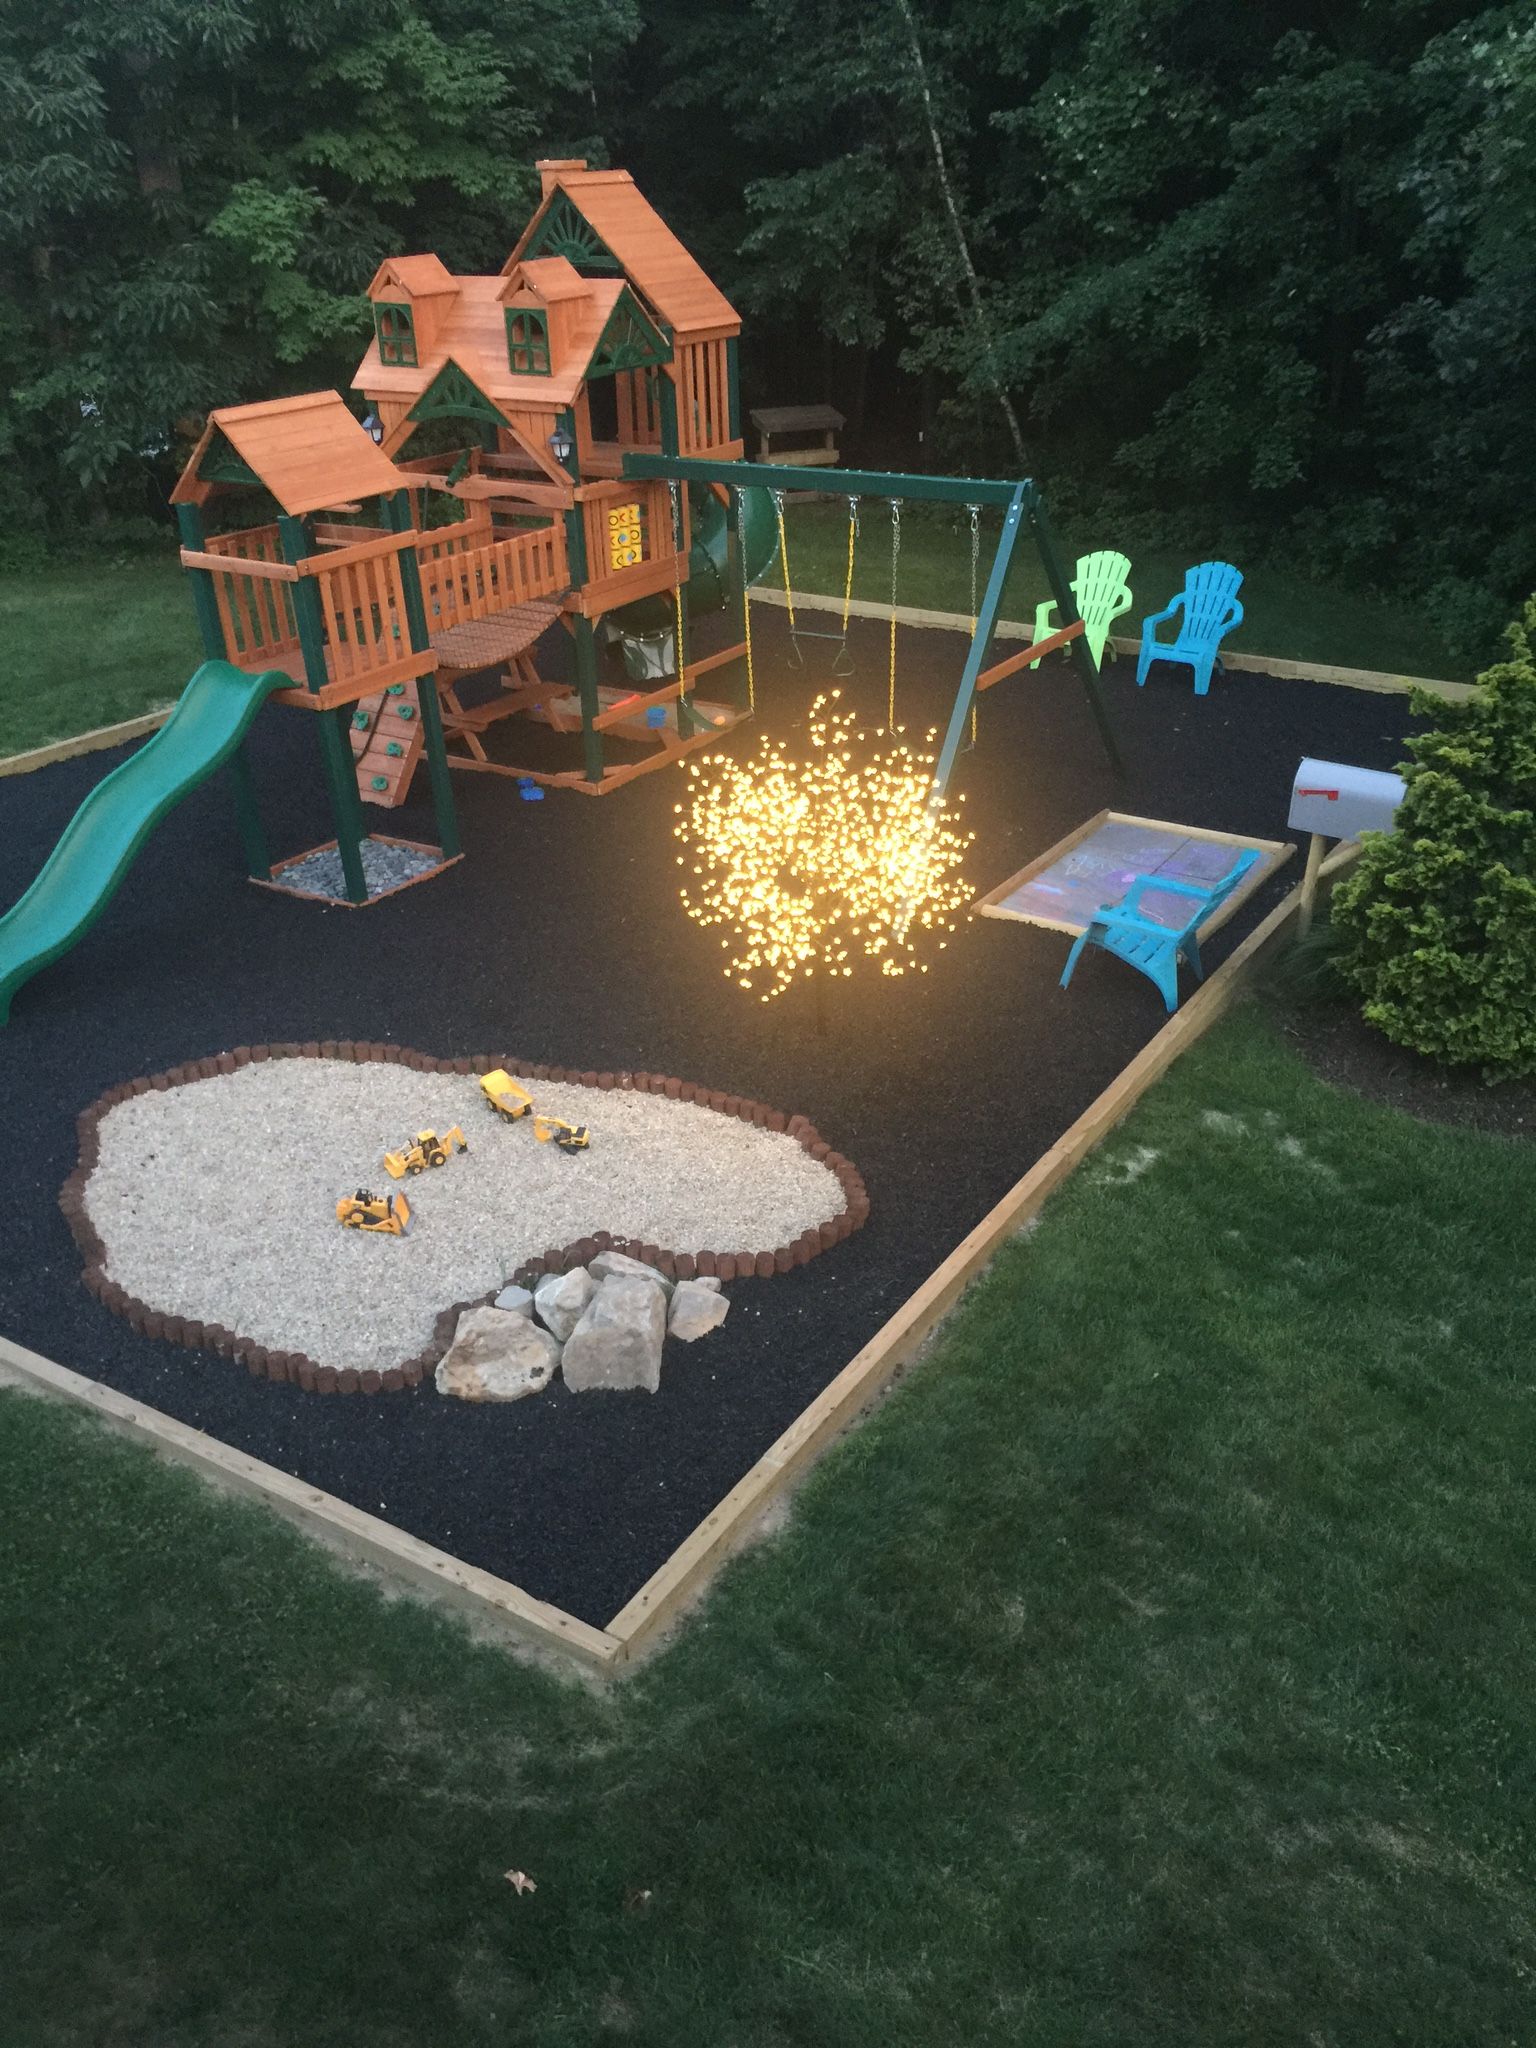 A Fun and Safe Haven for Kids: The Backyard Playground